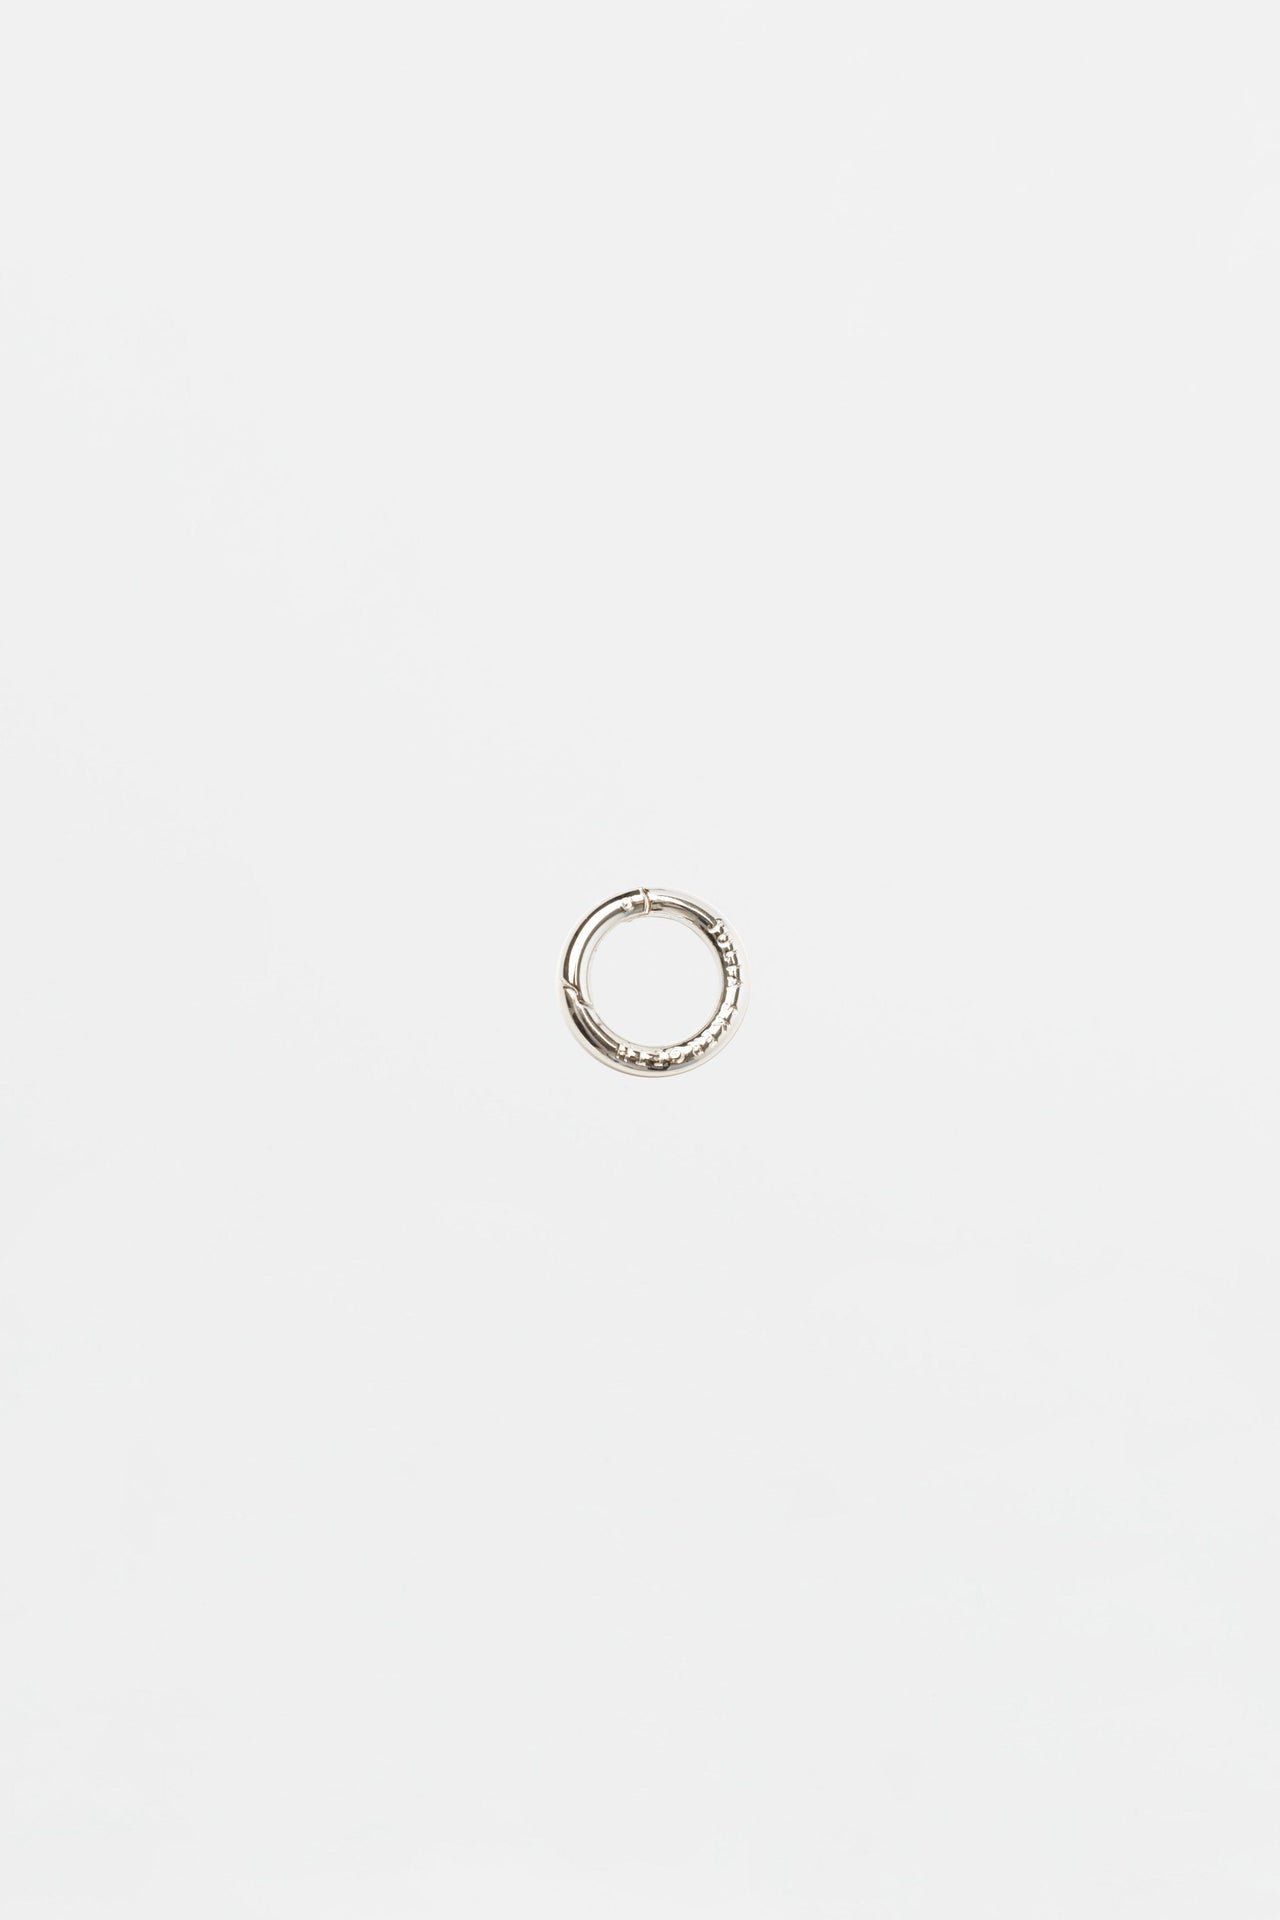 The Clip-On Ring Silver - JULIA SKERGETH